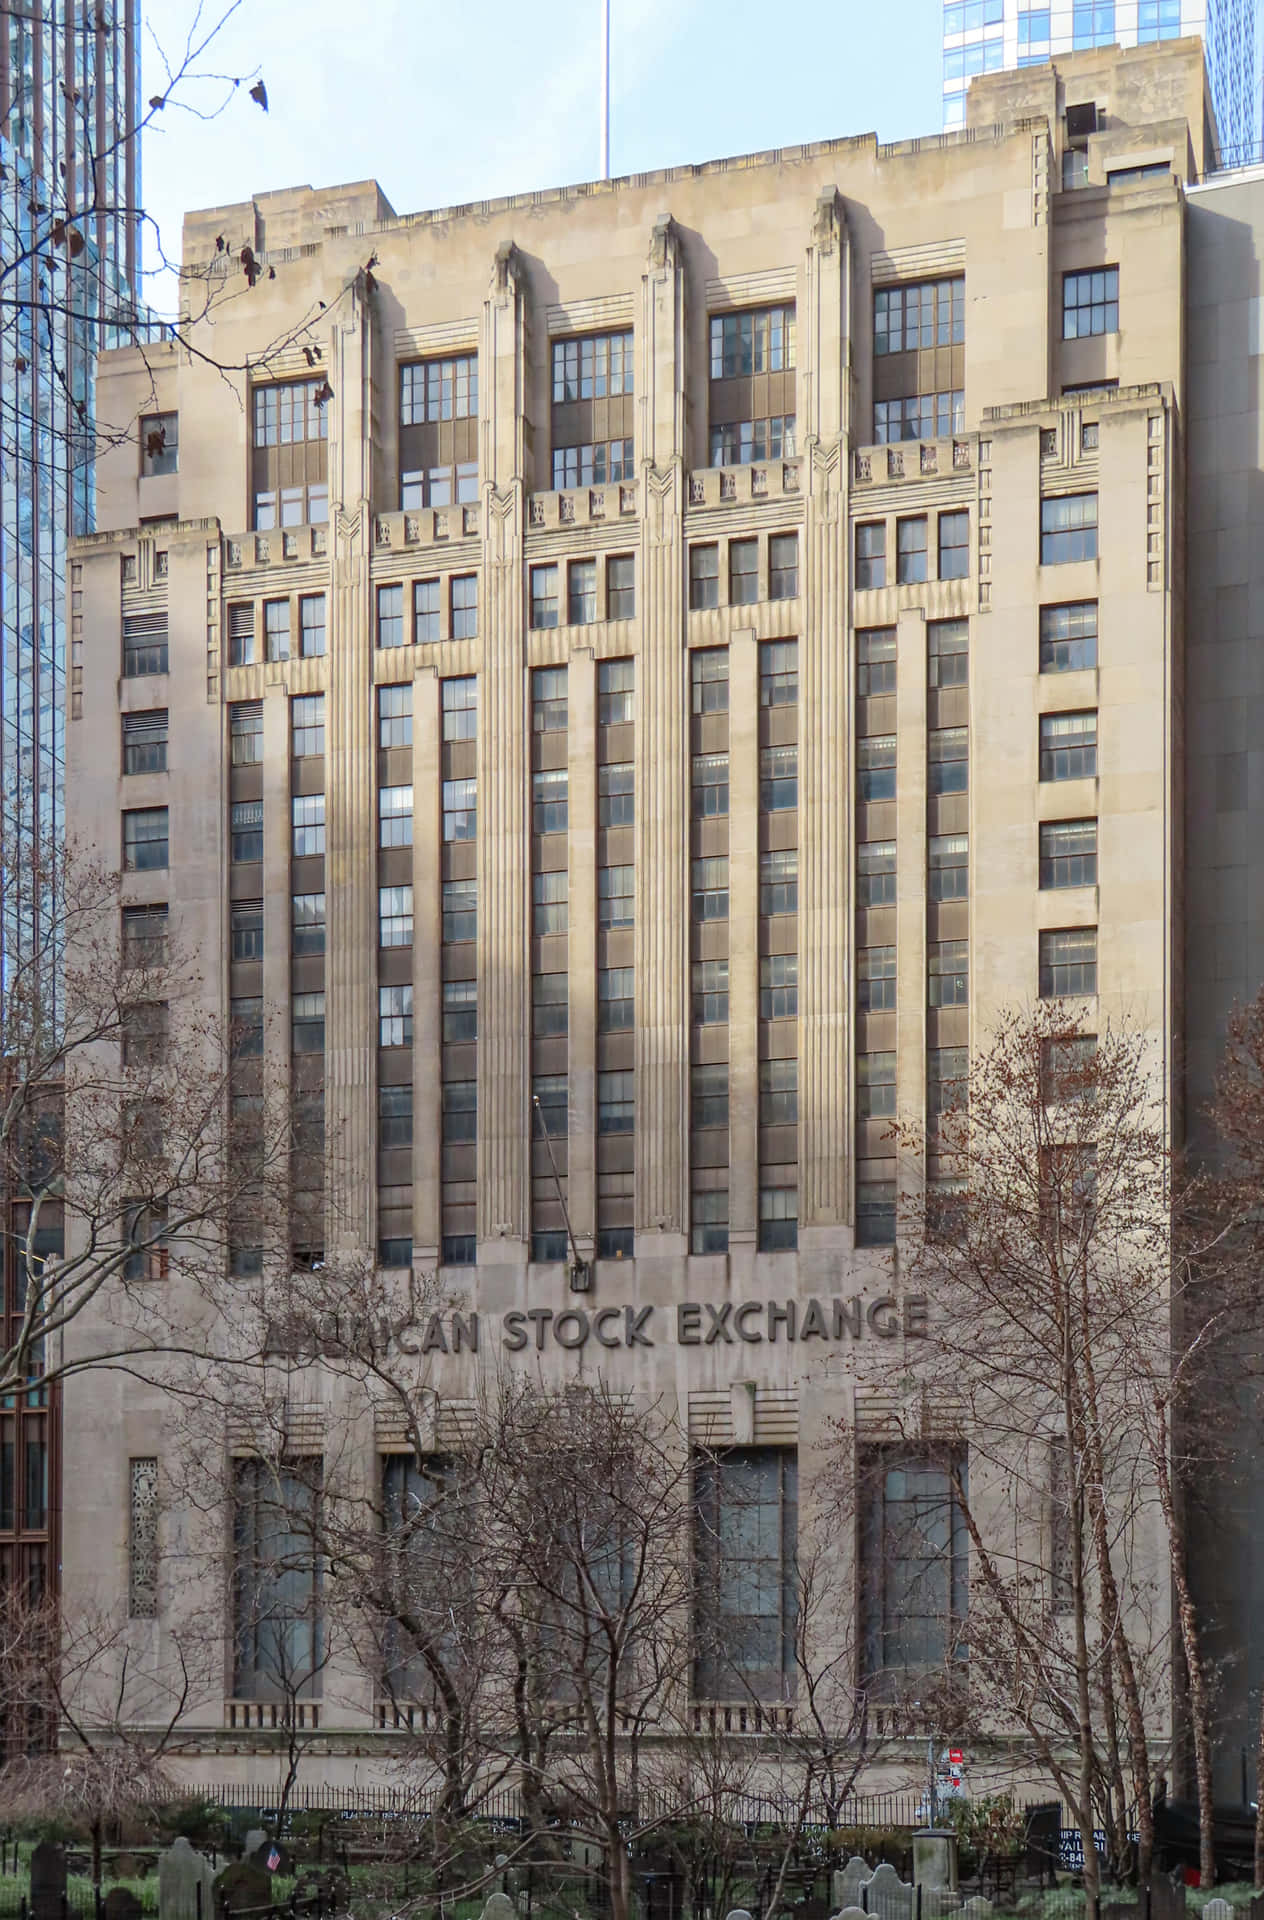 American Stock Exchange pictures